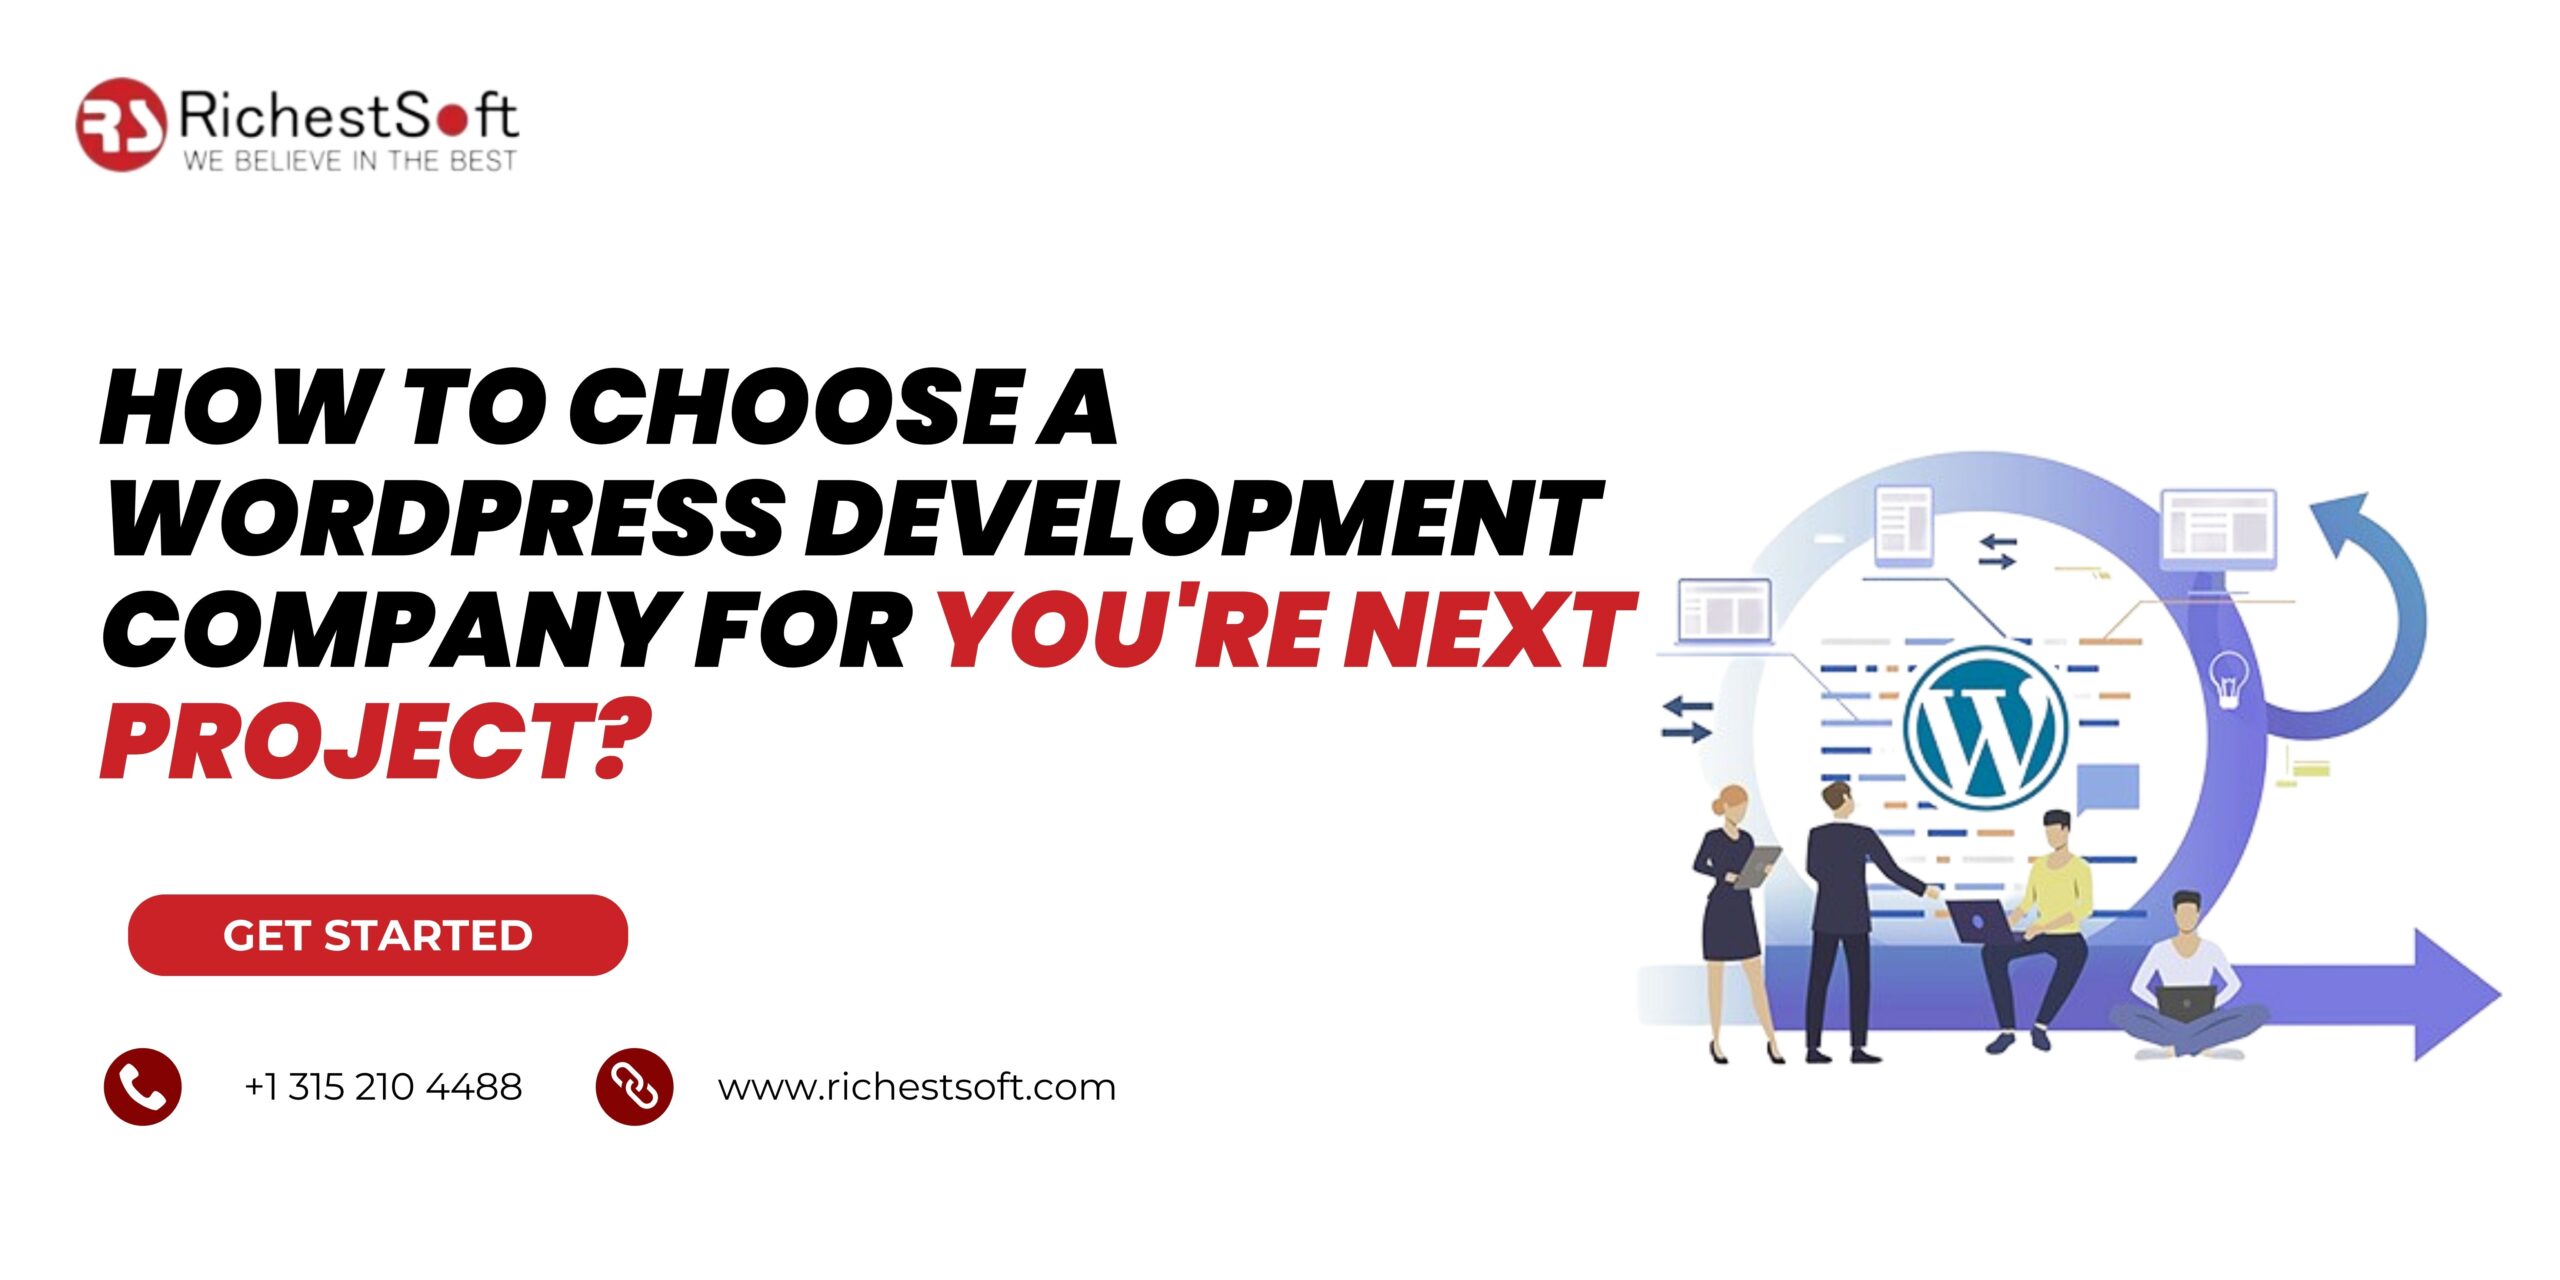 How to Choose WordPress Development Company for Next Project